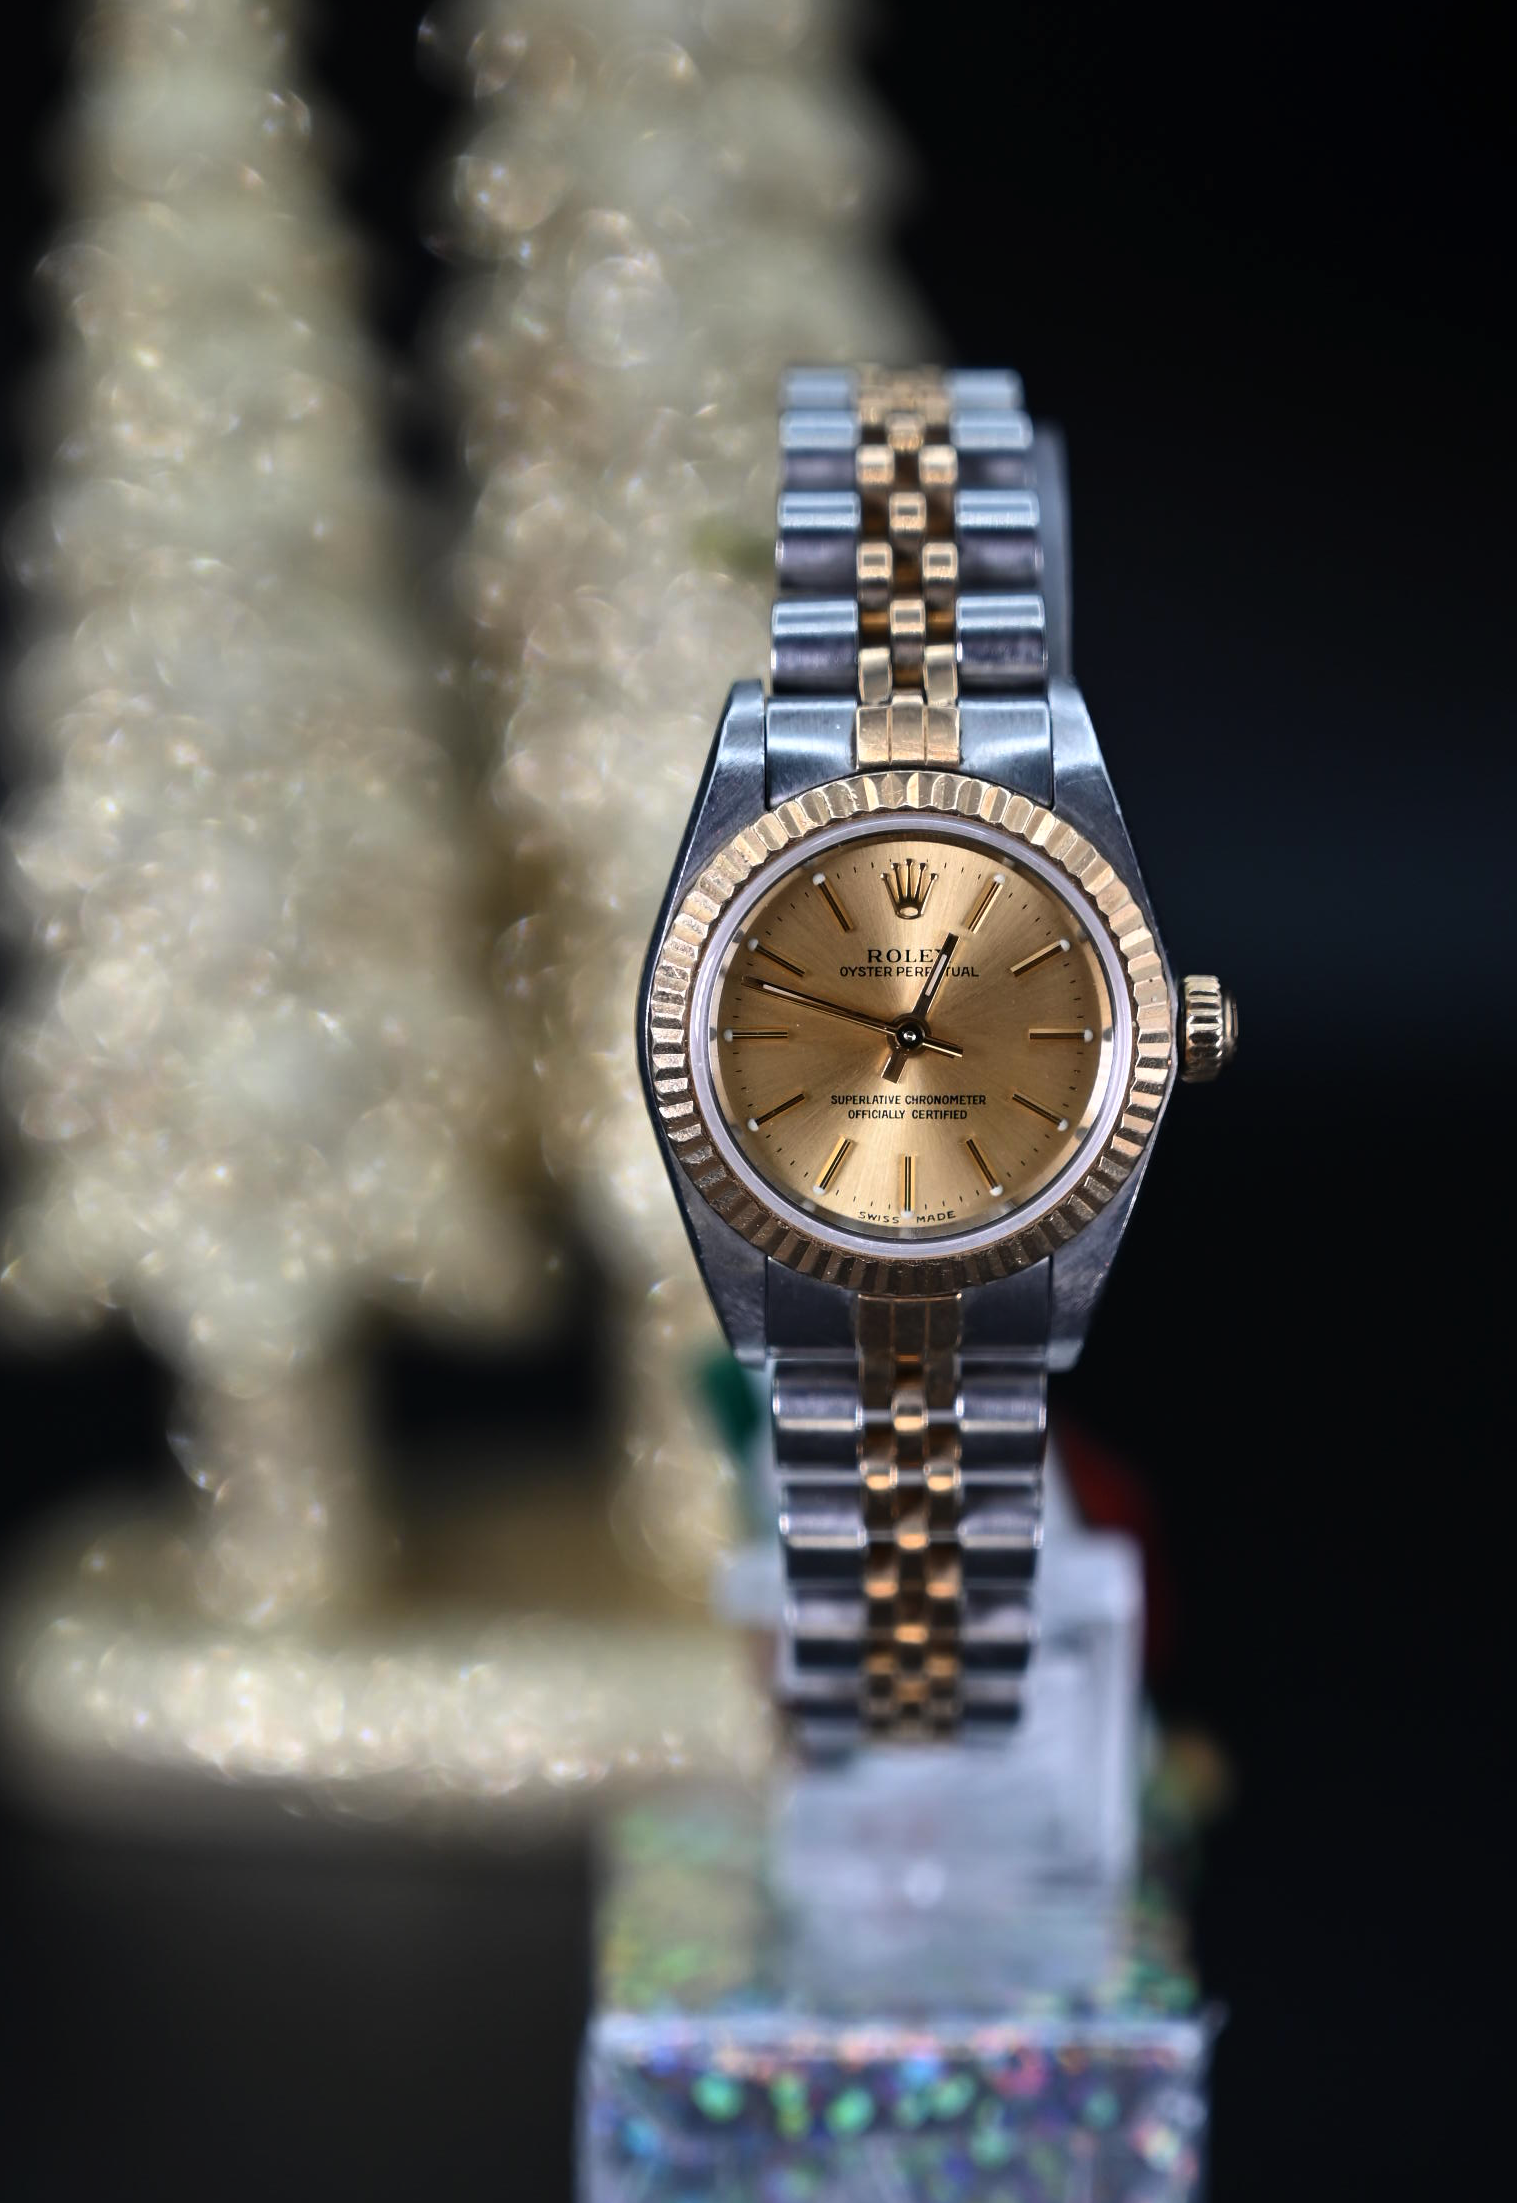 ROLEX OYSTER PERPETUAL LADY – Jewelers